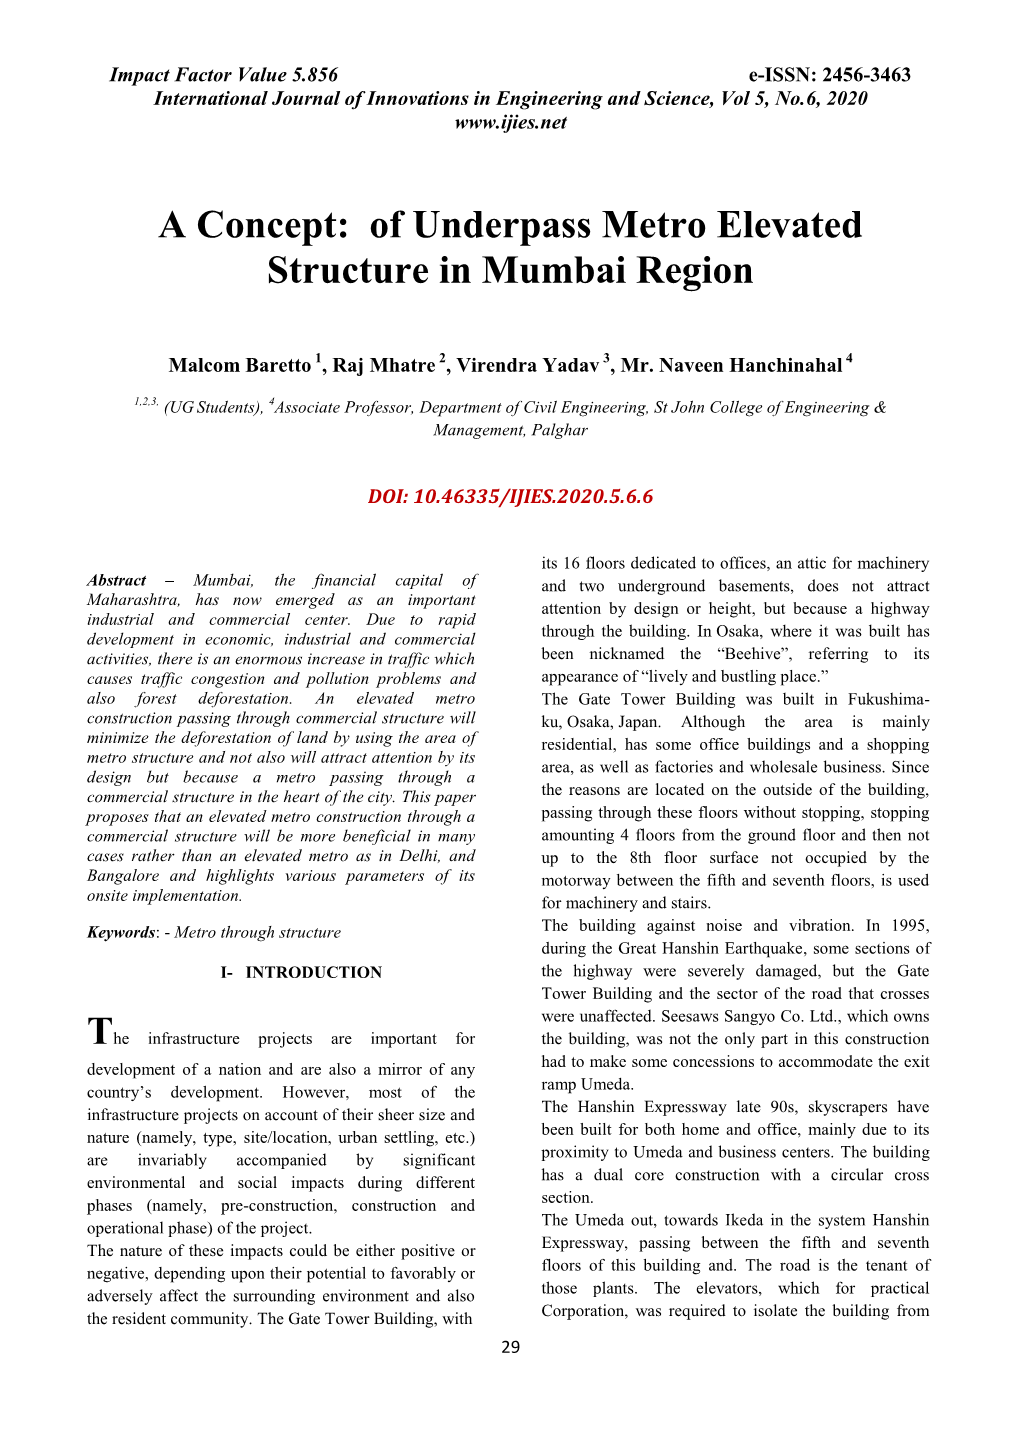 A Concept: of Underpass Metro Elevated Structure in Mumbai Region